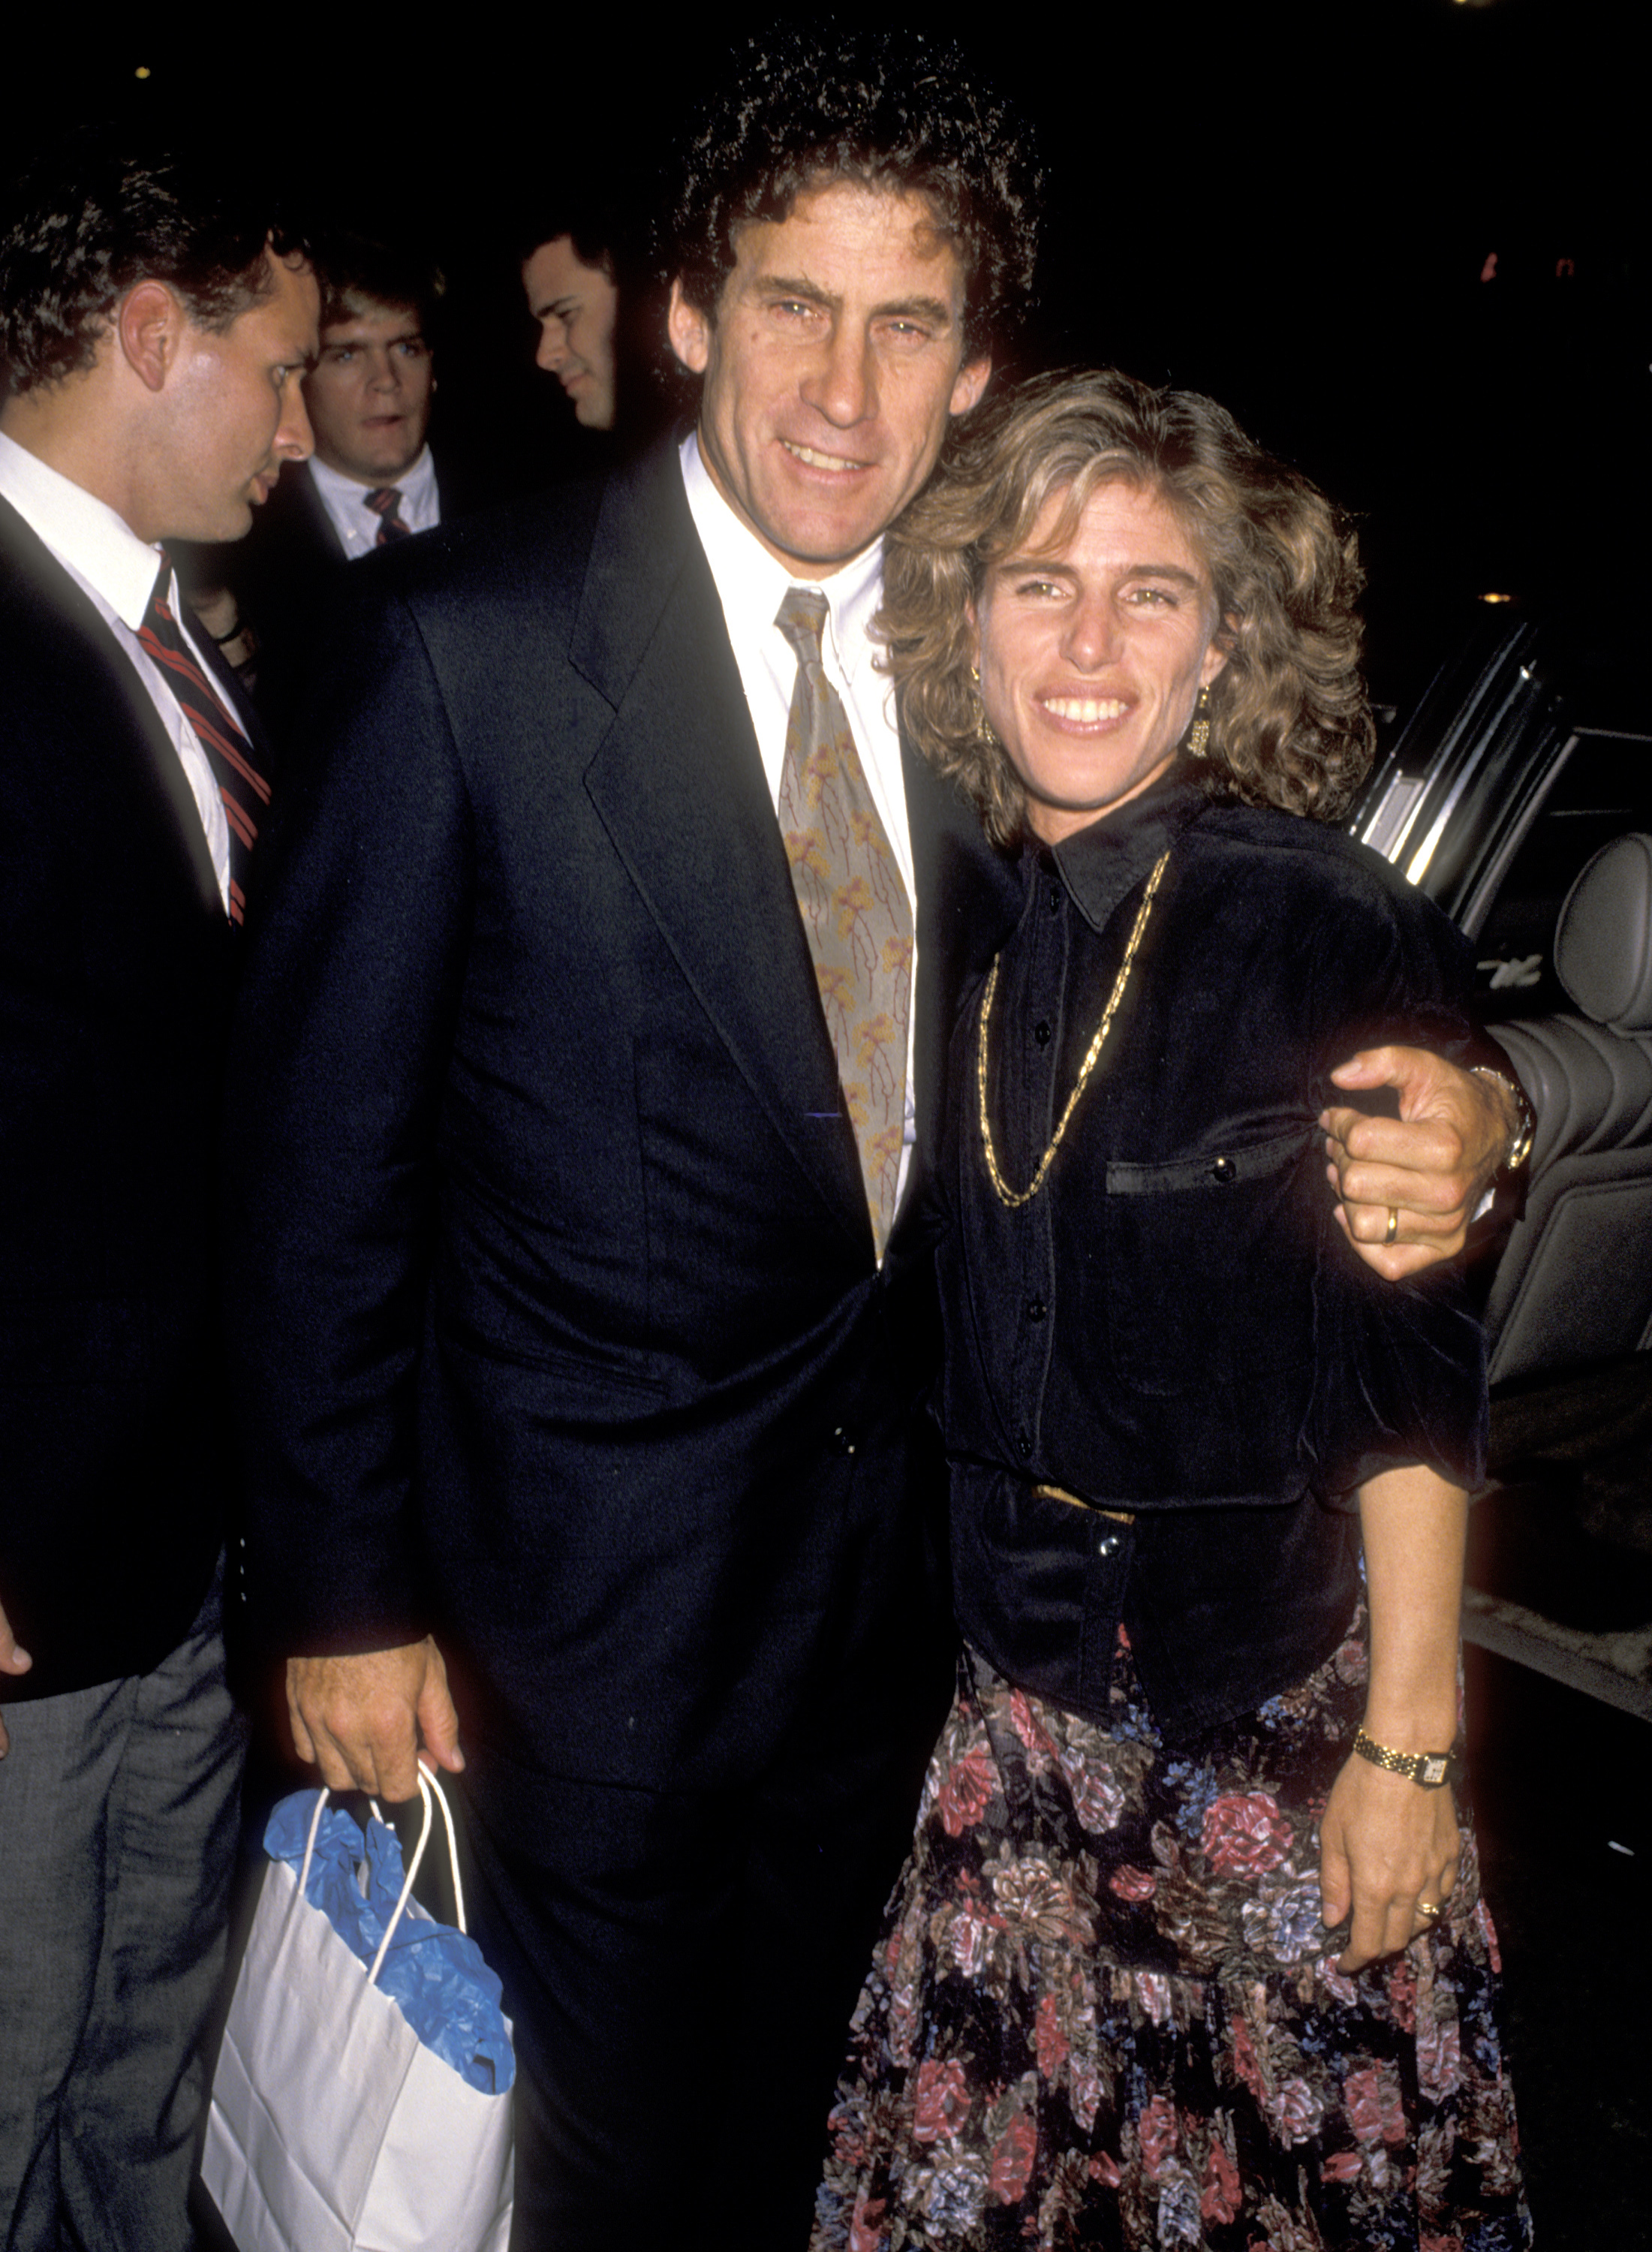 Paul Michael Glaser and his wife, activist Elizabeth Glaser, at the "Immediate Family" Hollywood premiere party at Hollywood Palladium on October 24, 1989 in Hollywood, California. | Source: Getty Images